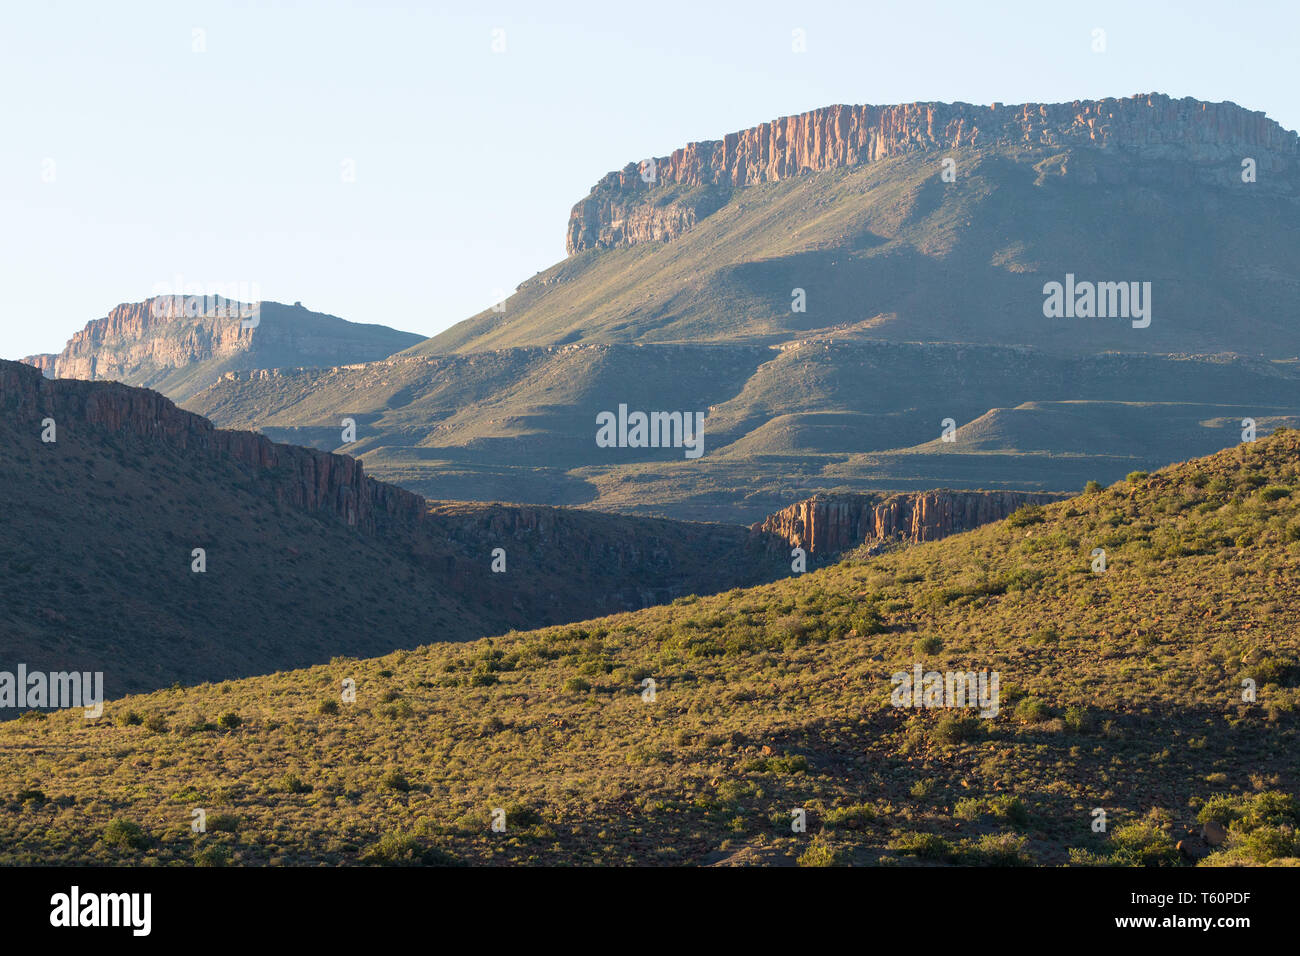 Karoo sunset landscape of hills or koppies softly lit by late Autumn or Fall sun on a semi desert region of South Africa in the Karoo National Park Stock Photo